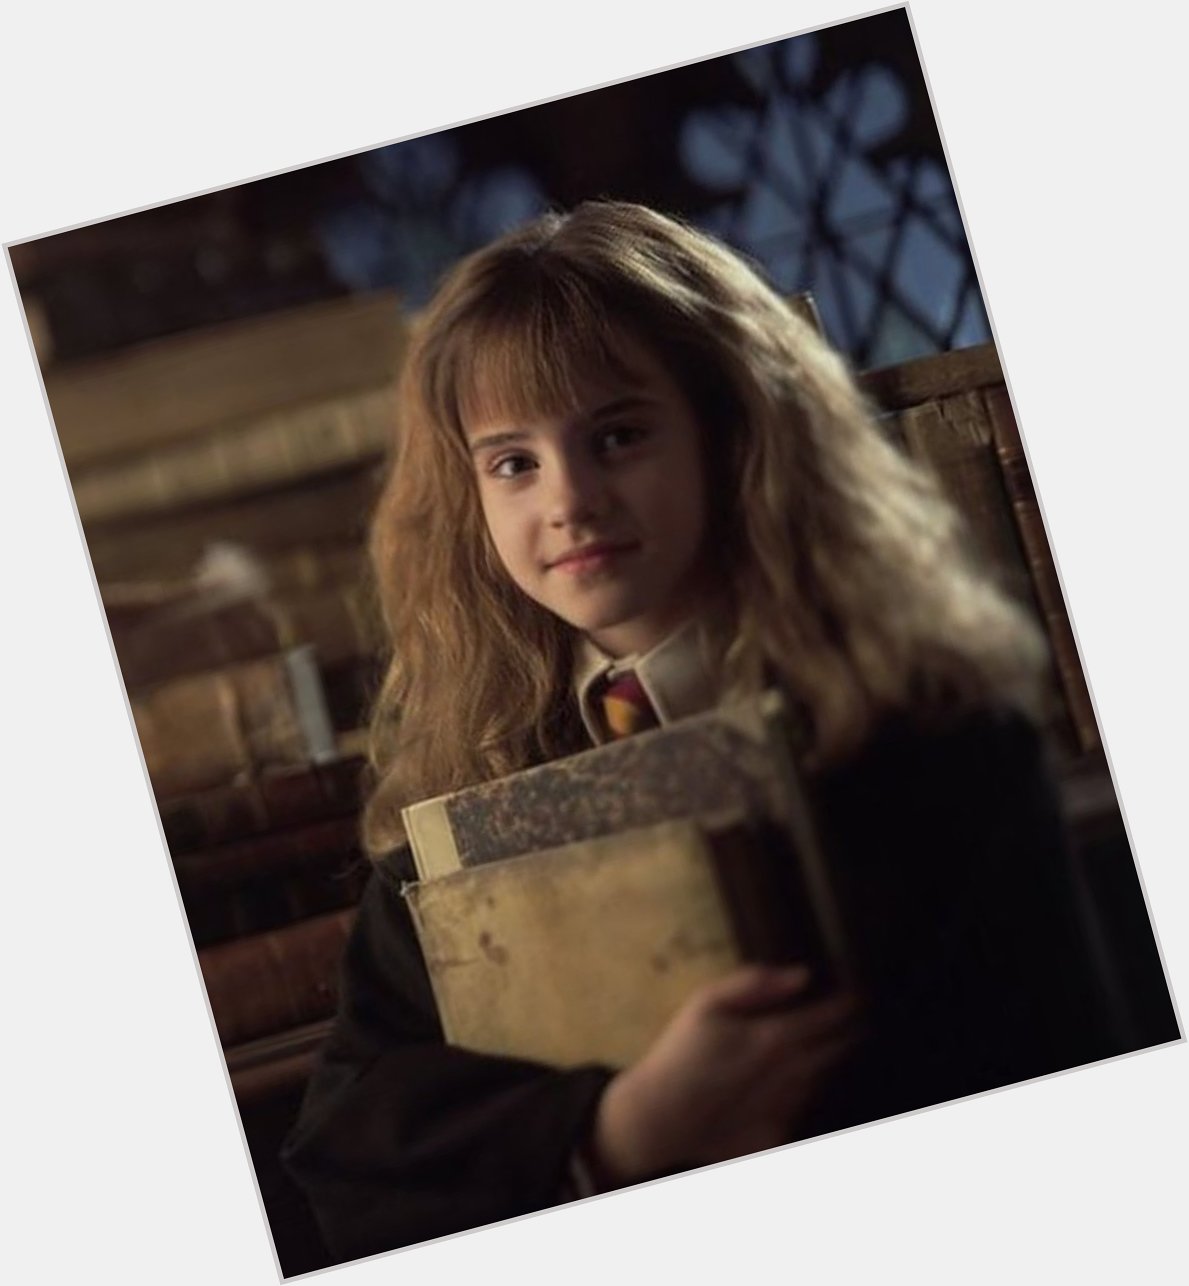 Happy birthday to miss granger the brightest witch of her age:)
.
.
.i really miss her az hermione granger 